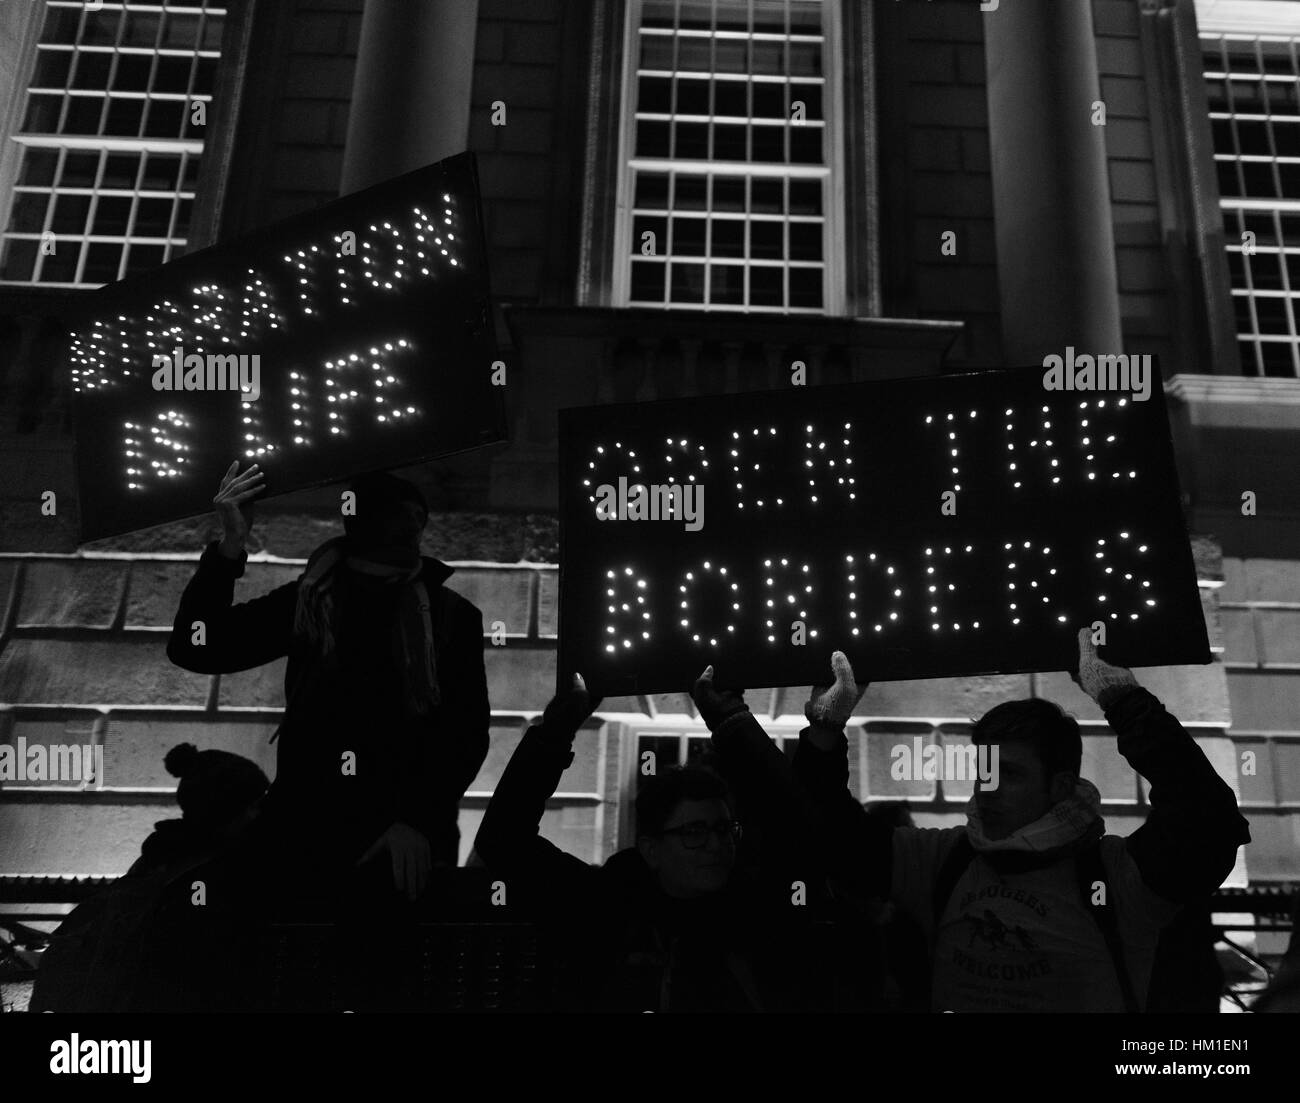 London, Great Britain. 30th Jan, 2017. Anti-Trump demonstration in front of 10 Downing Street in protest against Trump travel ban. London, UK.  Credit: dpa/Alamy Live News Stock Photo